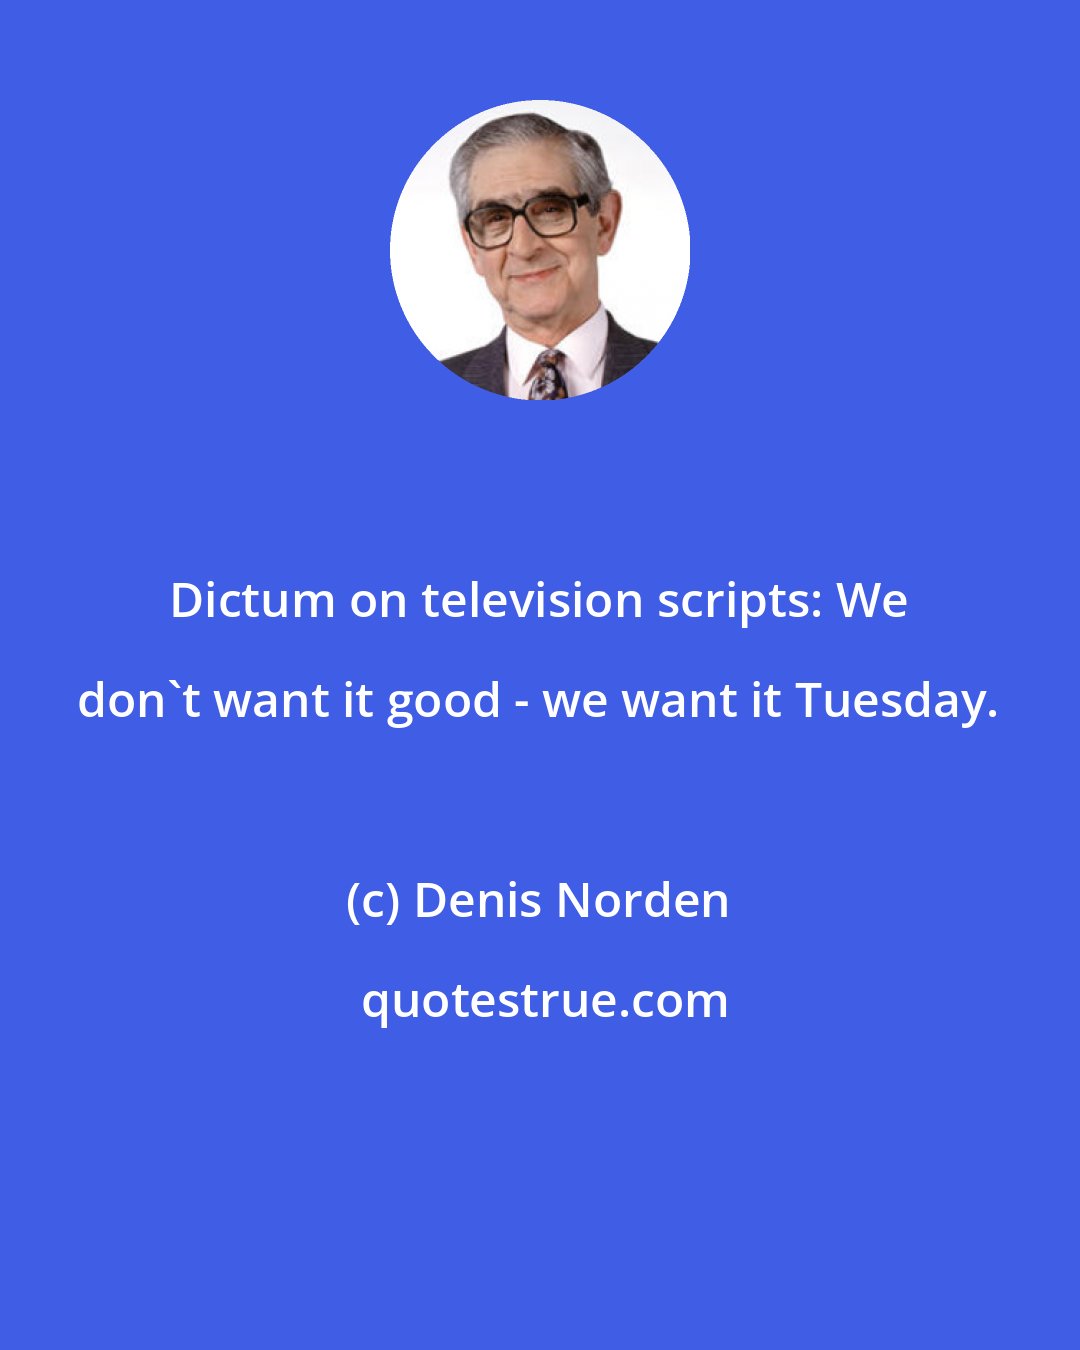 Denis Norden: Dictum on television scripts: We don't want it good - we want it Tuesday.